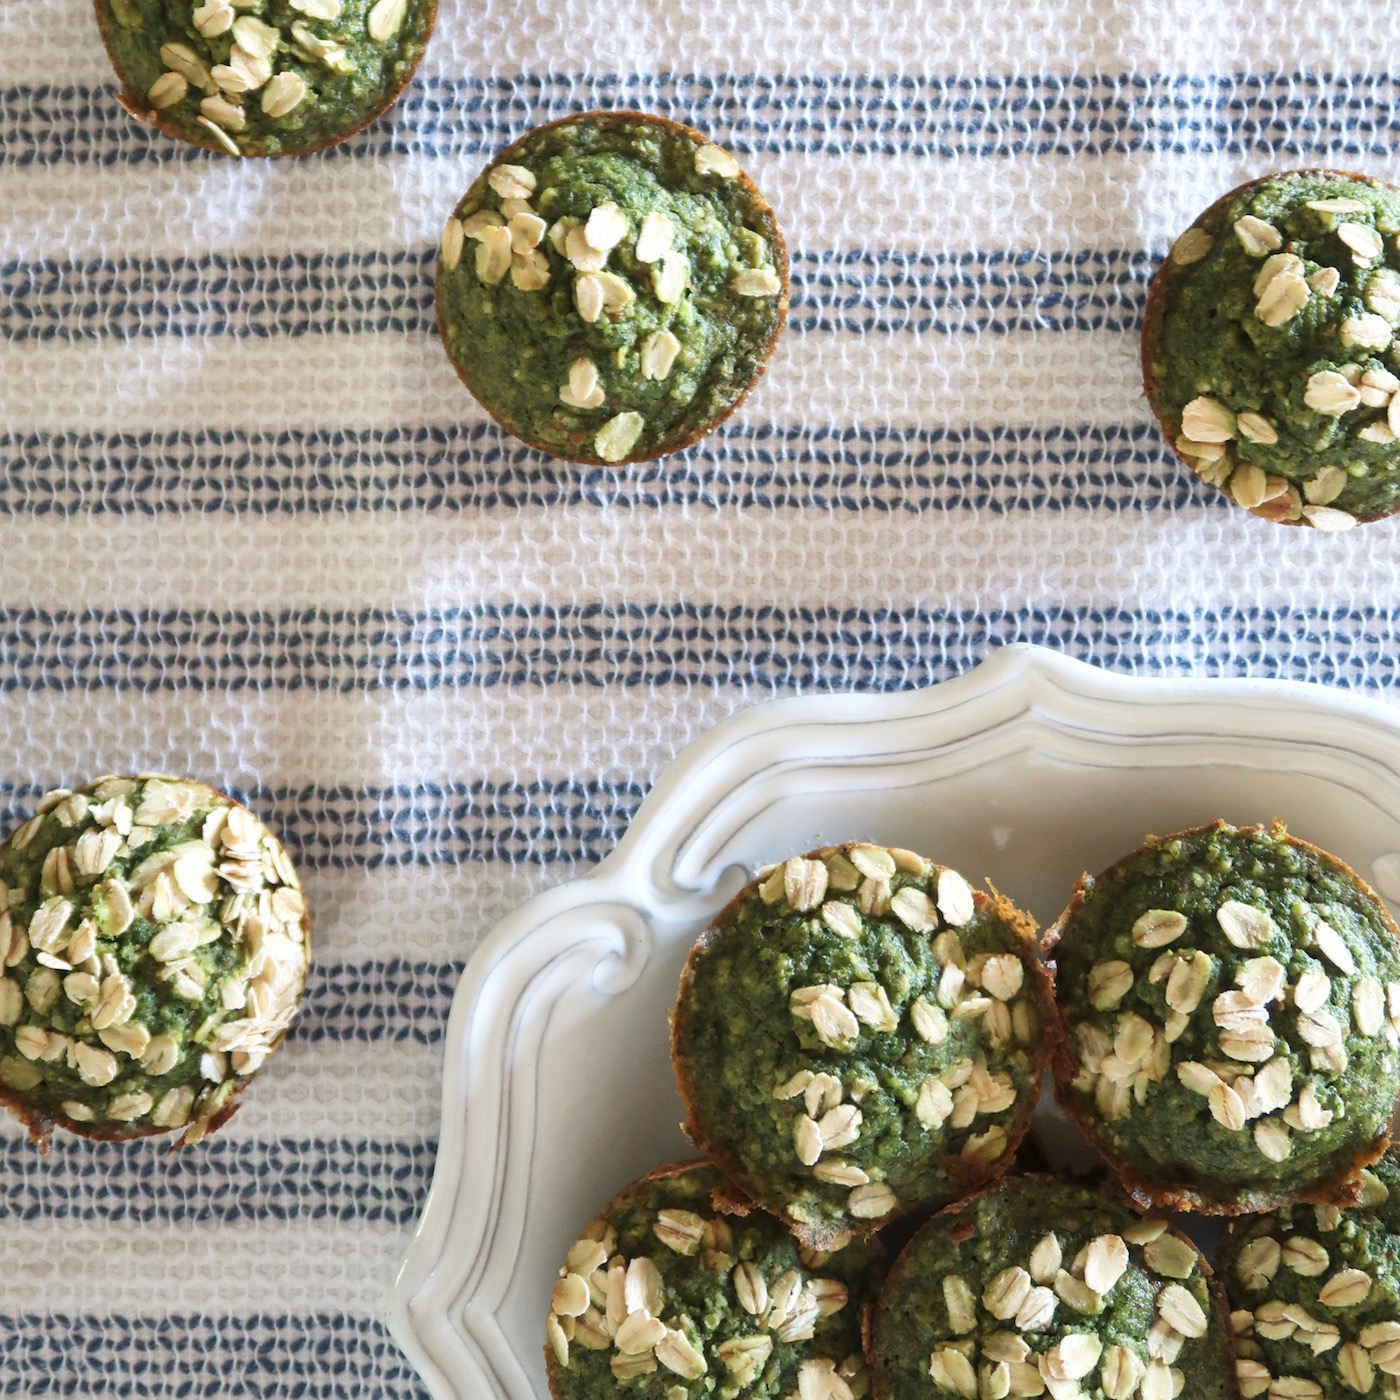 Ninja Turtle Muffins (packed with spinach and have no processed flour or sugar!)